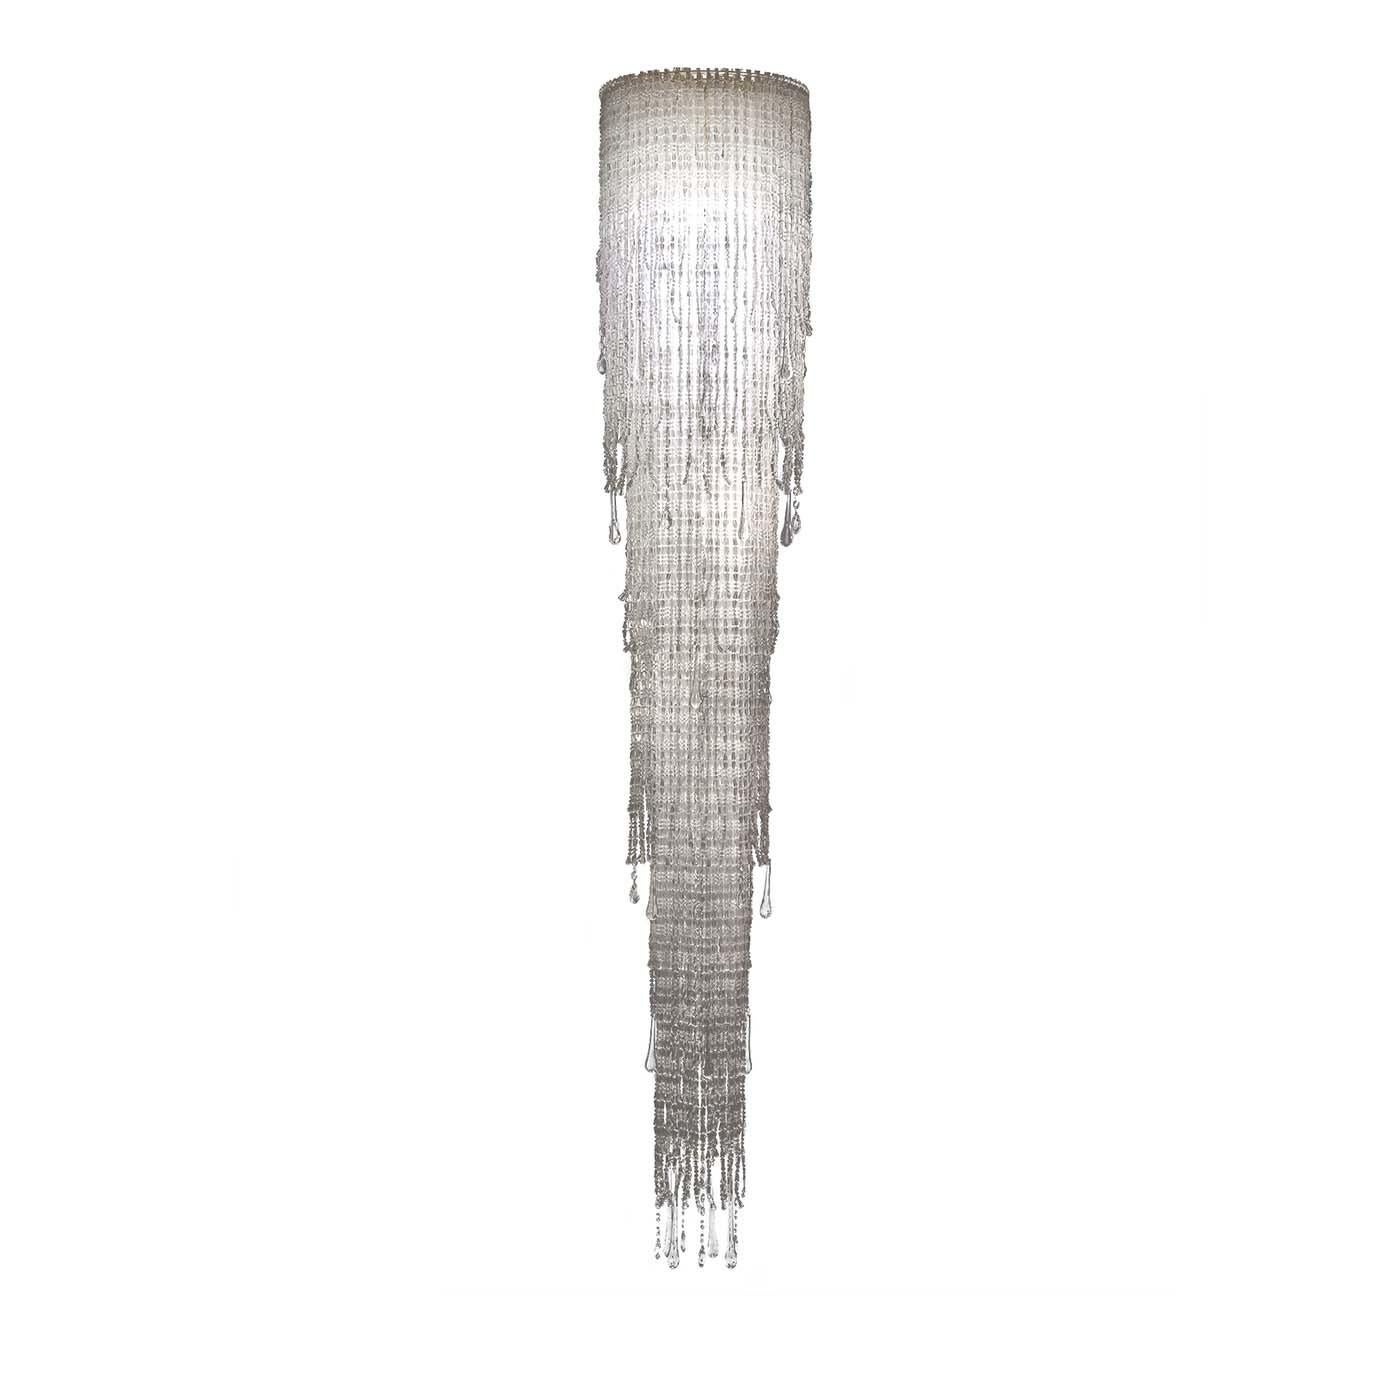 A stunning cascade handmade of strands of irregularly shaped, transparent beads marks the design of this splendid suspension lamp. Its alluring design, enriched by crystal elements, will effortlessly stand out in the most sophisticated decors.